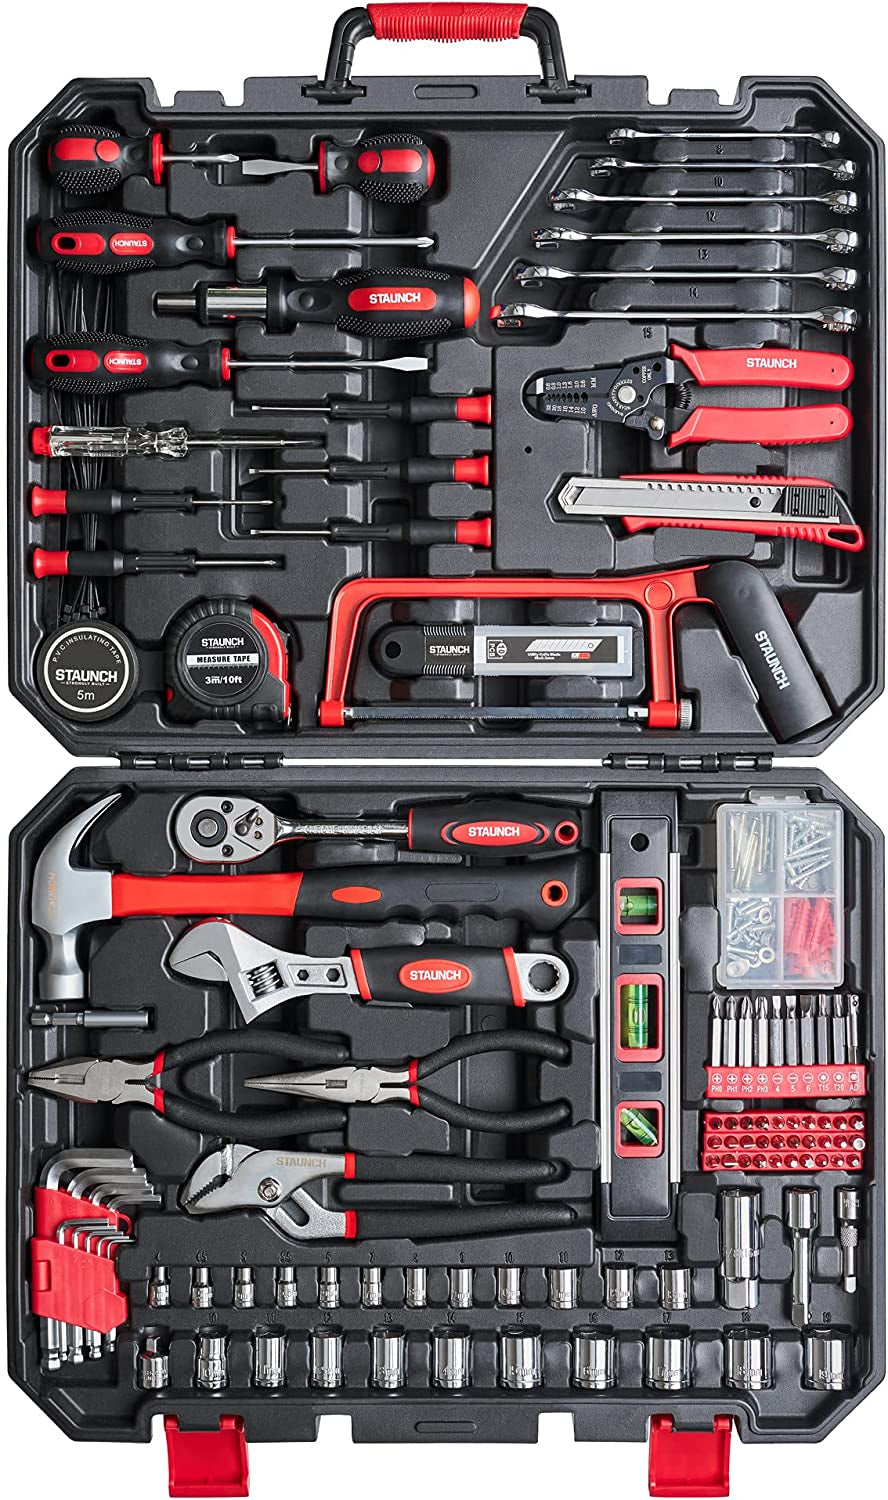 200 Piece Home and Office Toolkit Set | Complete Starter Tool Kit Set & Organiser Tool Box with Tools Included | General Household Tool Kits for Home with DIY Tools in Tool Case